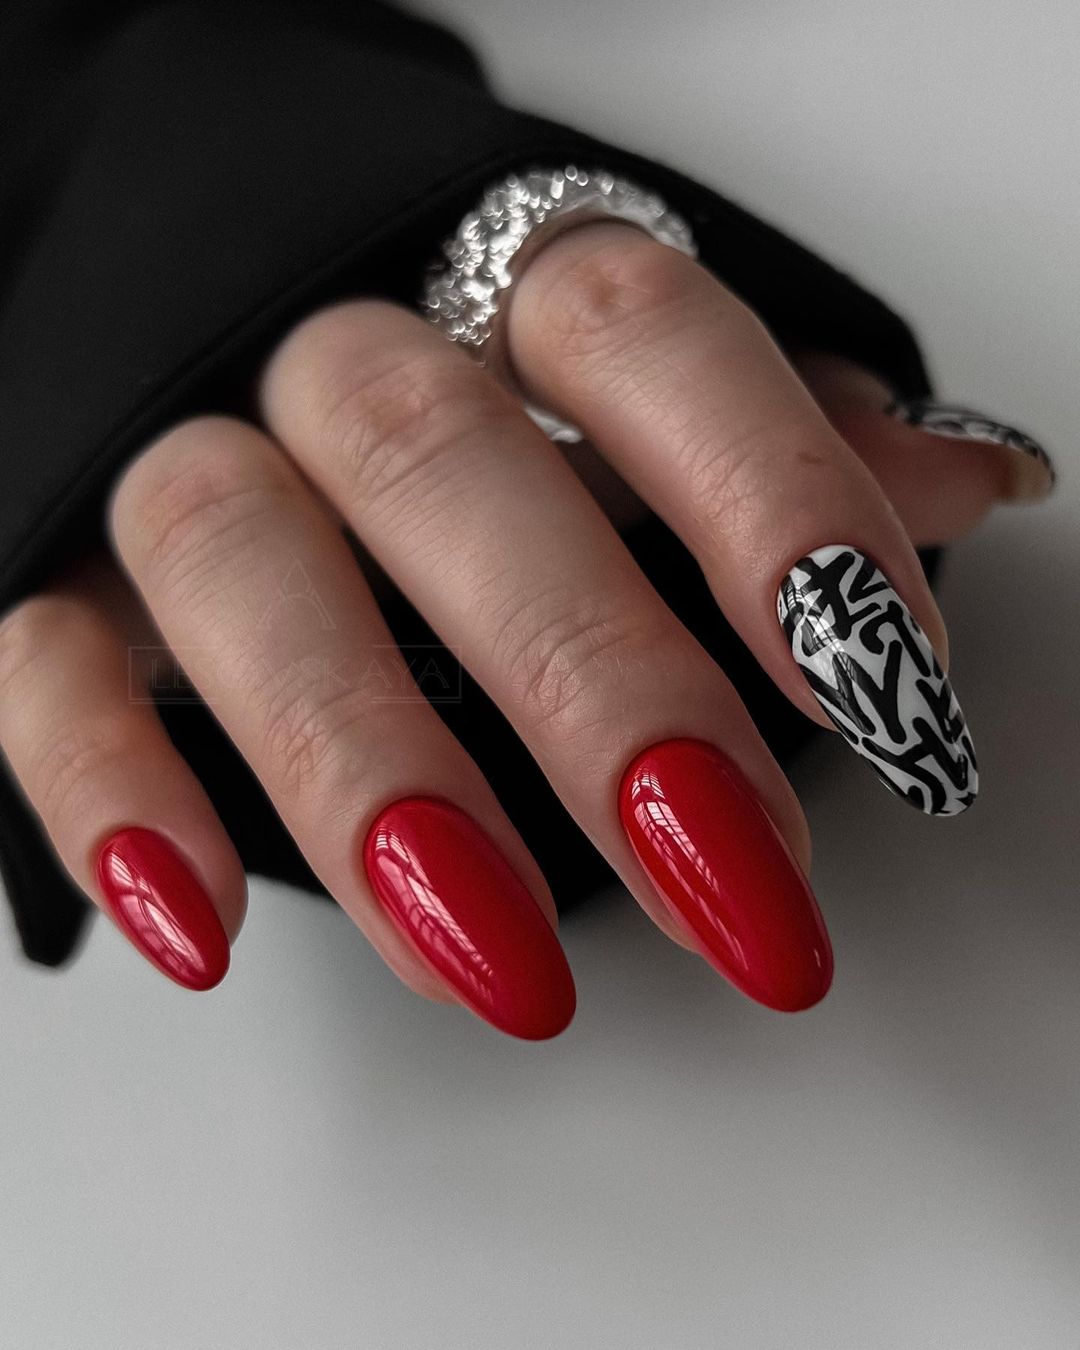 Round Red Gel Nails with Black and White Design